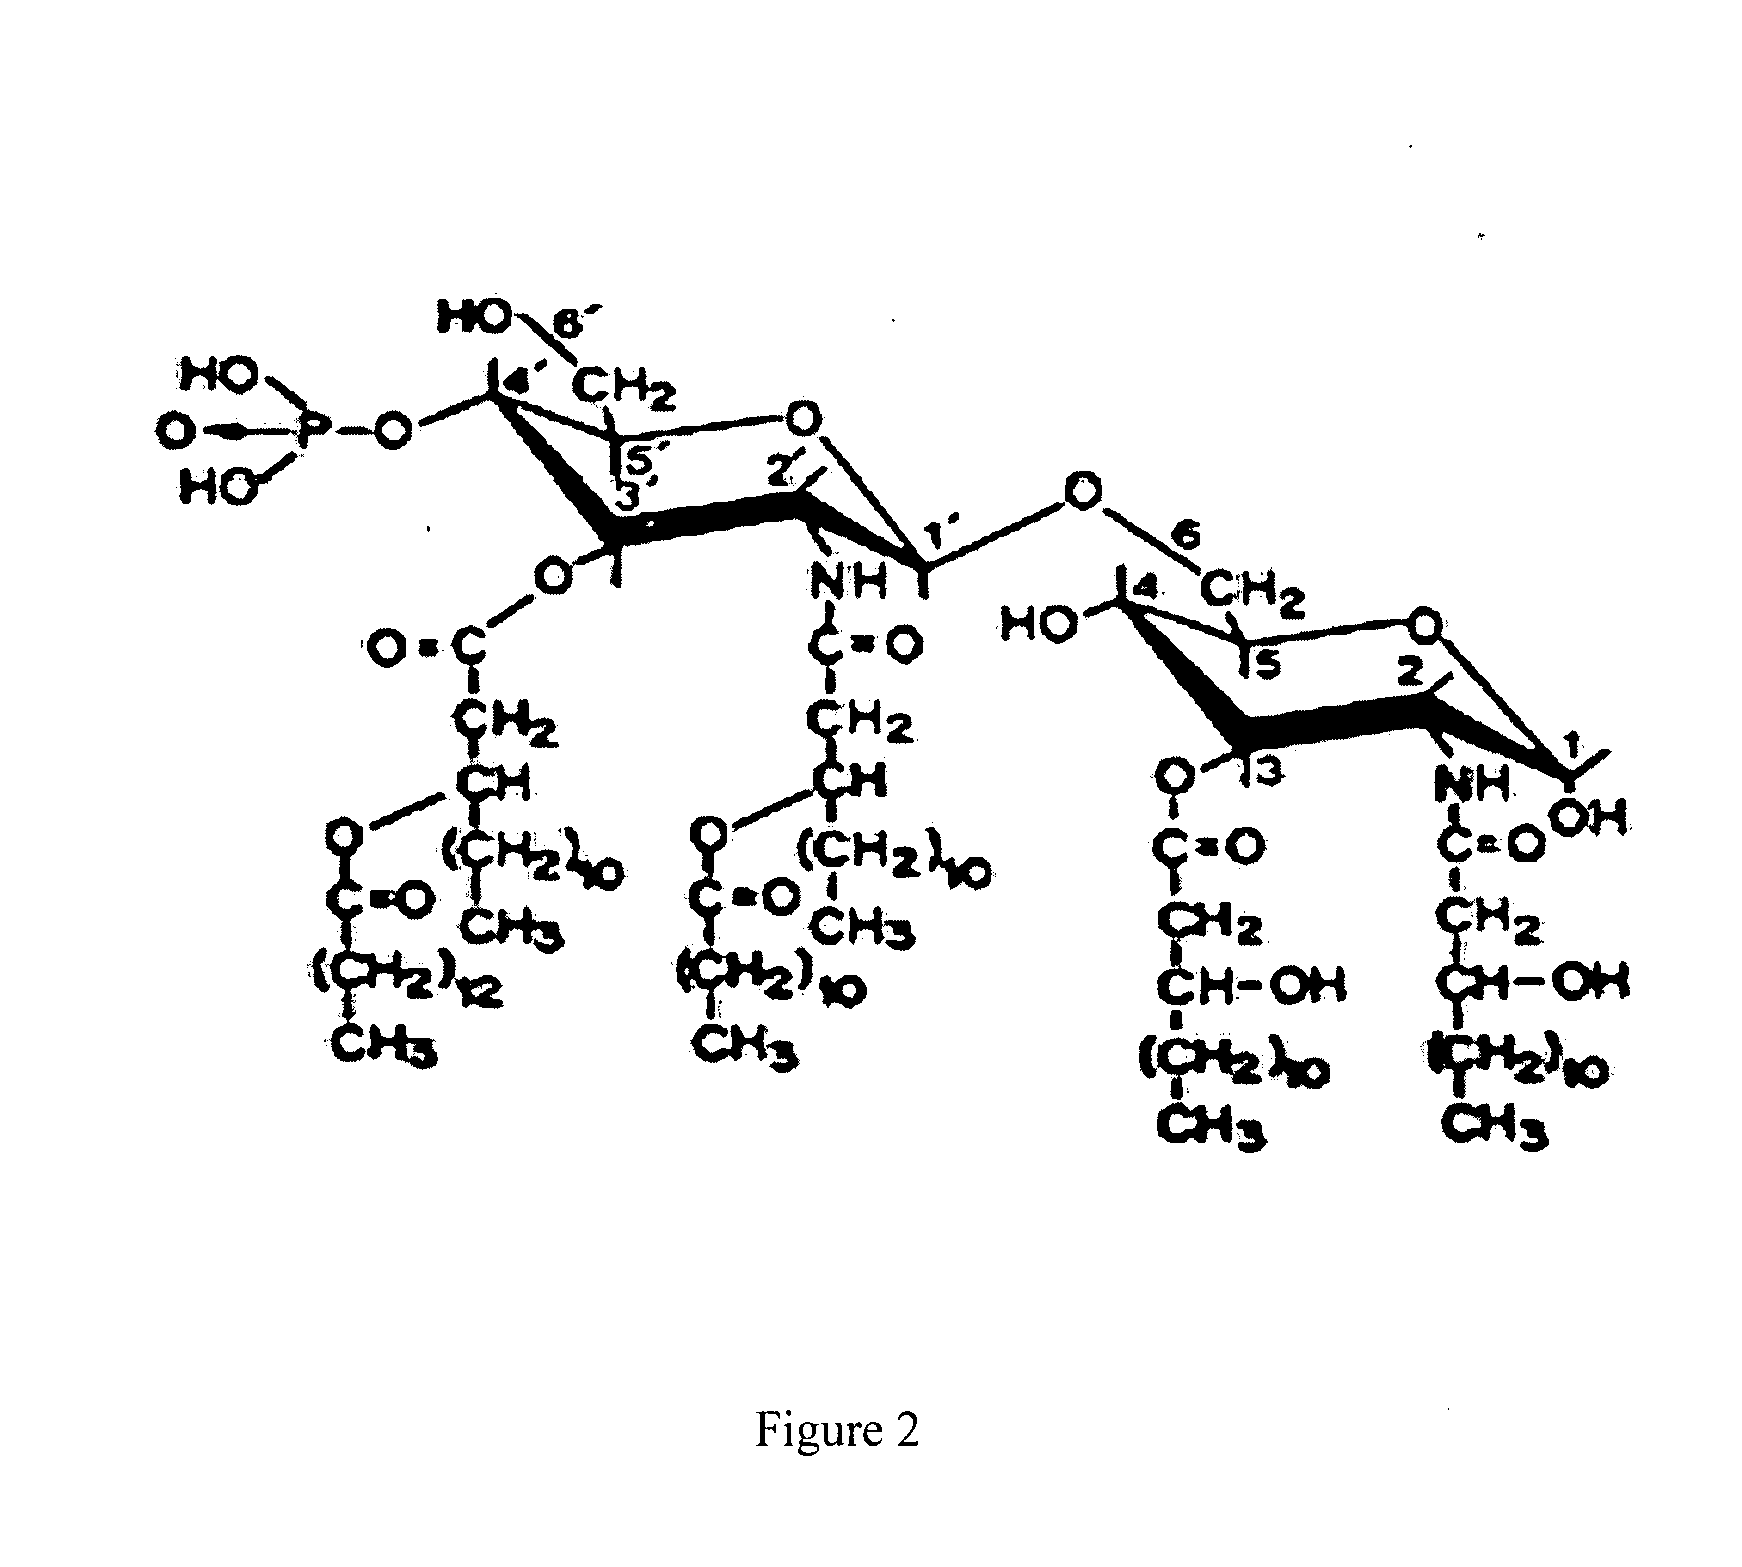 Methods of making a chitosan product having an ultra-low endotoxin concentration and the ultra-low endotoxin chitosan product derived therefrom and method of accurately determining inflammatory and anti-inflammatory cellular response to such materials